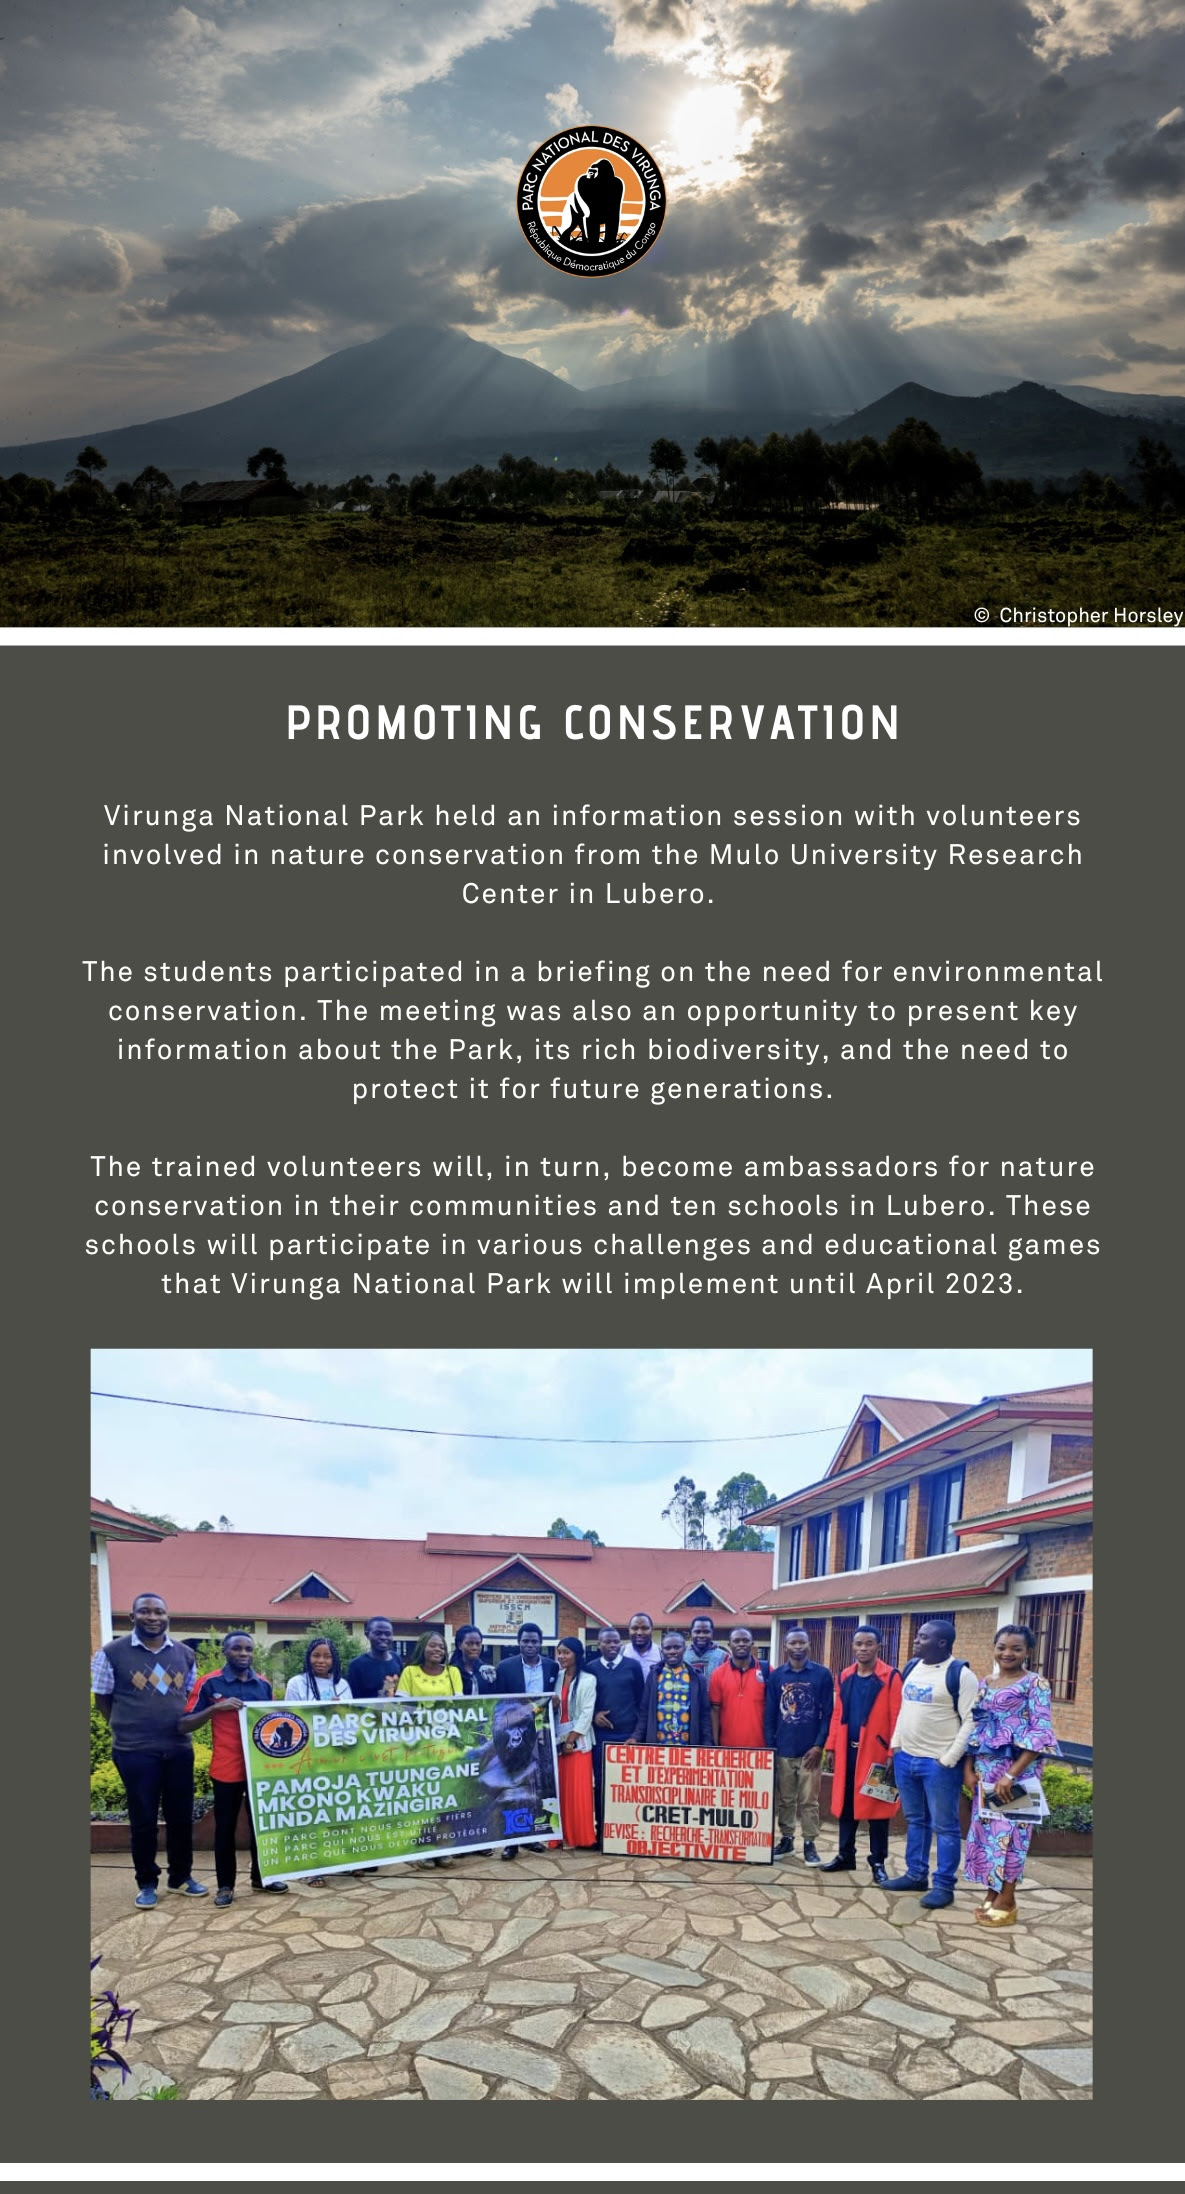 Virunga National Park held an information session with volunteers involved in nature conservation from the Mulo University Research Center in Lubero.   The students participated in a briefing on the need for environmental conservation. The meeting was also an opportunity to present key information about the Park, its rich biodiversity, and the need to protect it for future generations.